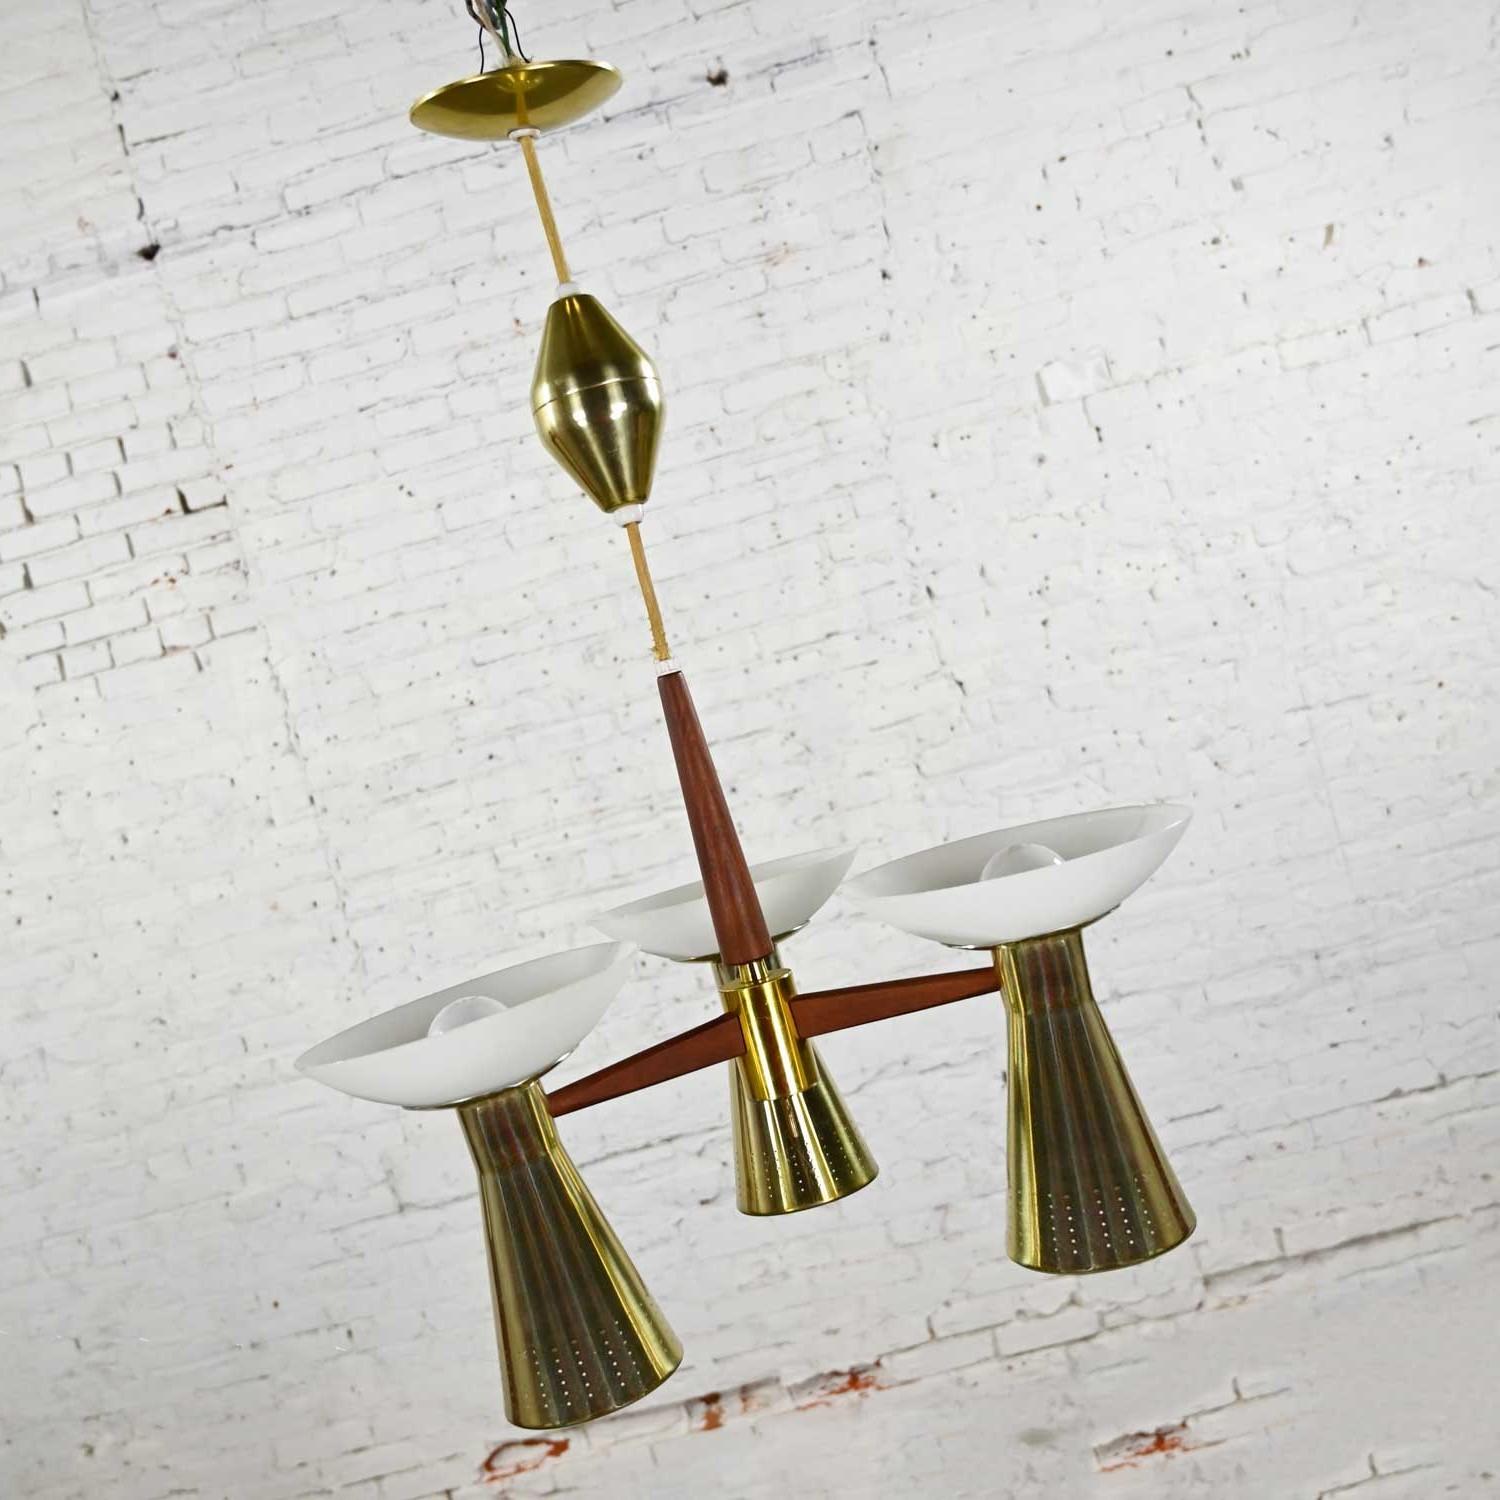 Fabulous Mid-Century Modern Emerson by Imperialites pull down & retractable pendant light fixture or chandelier comprised of walnut, brass plate, six lights, and white glass bowl shaped shades. Beautiful condition, keeping in mind that this is